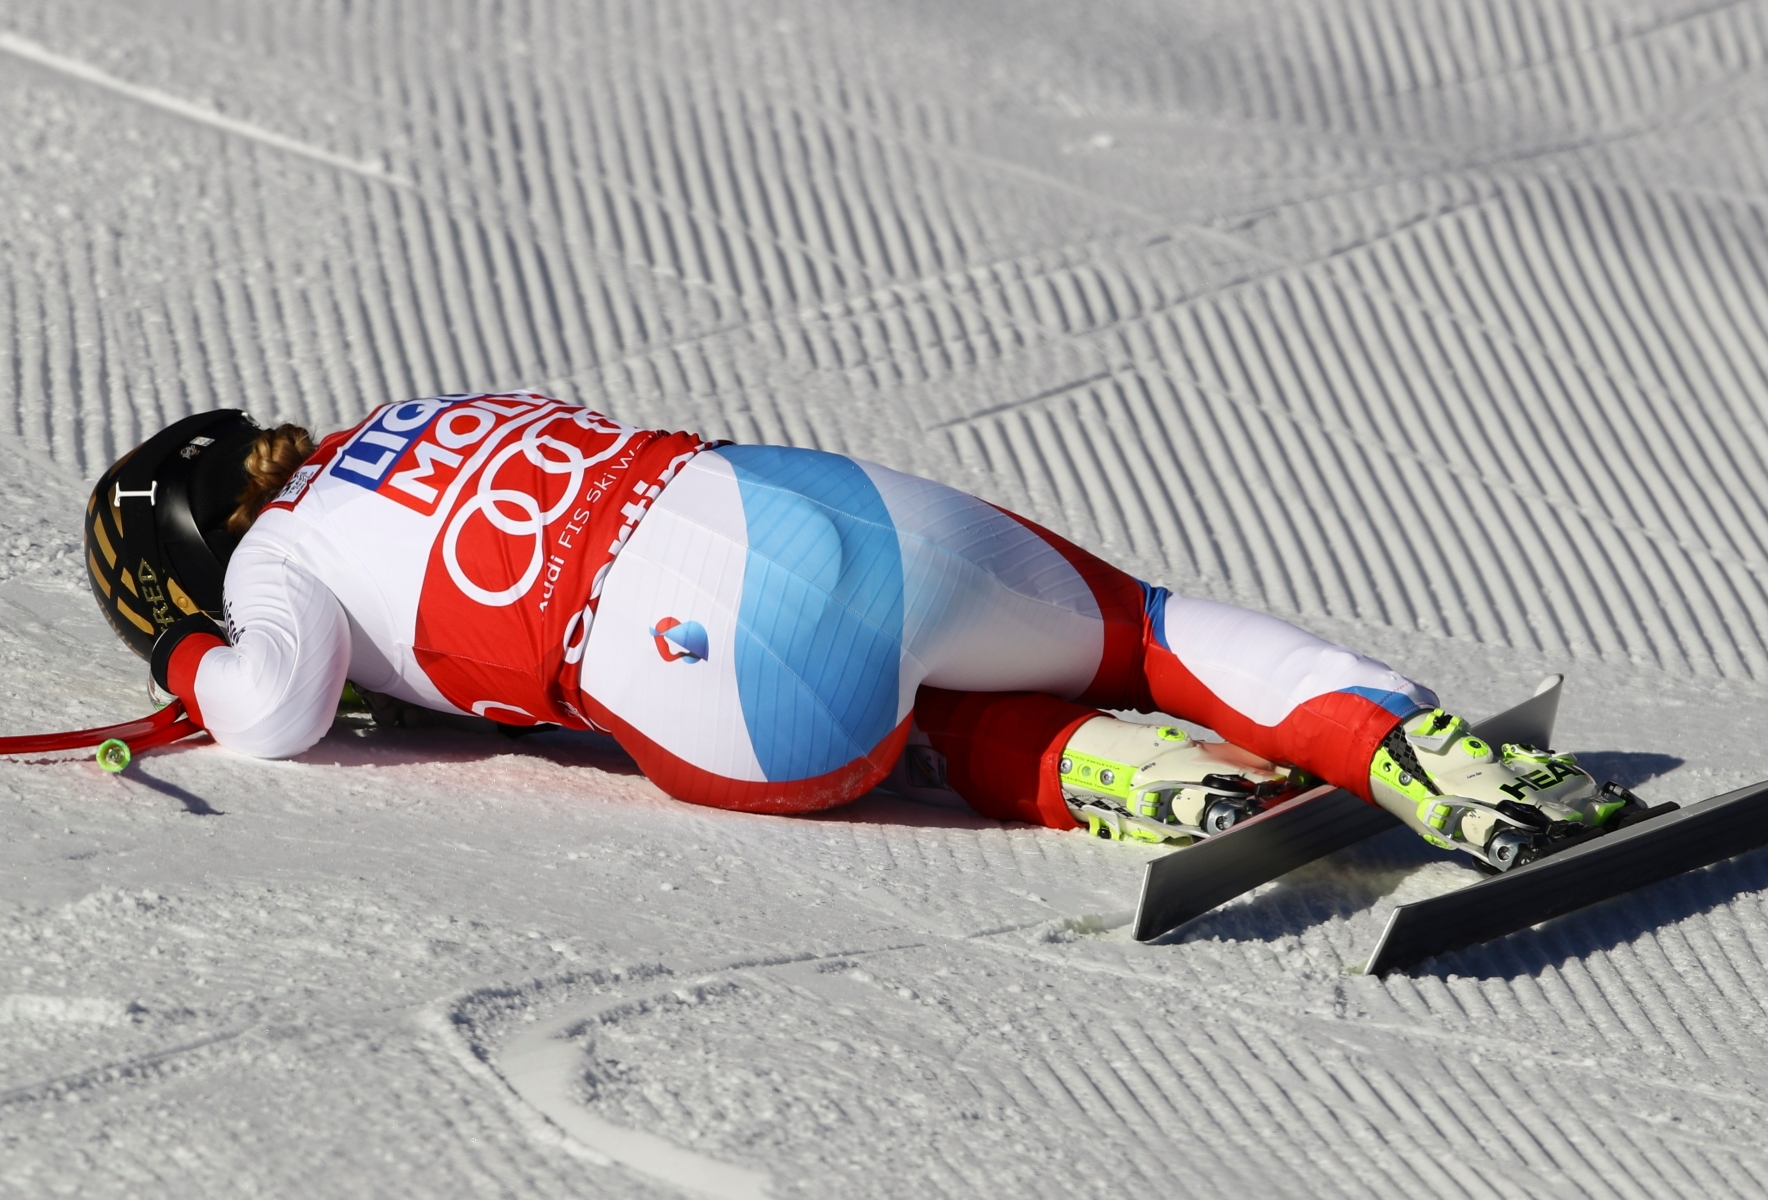 Switzerland's Lara Gut lies in the snow after completing an alpine ski, women's World Cup super-G, in Cortina d'Ampezzo, Italy, Sunday, Jan. 29, 2017. (AP Photo/Alessandro Trovati) Italy Alpine Skiing World Cup